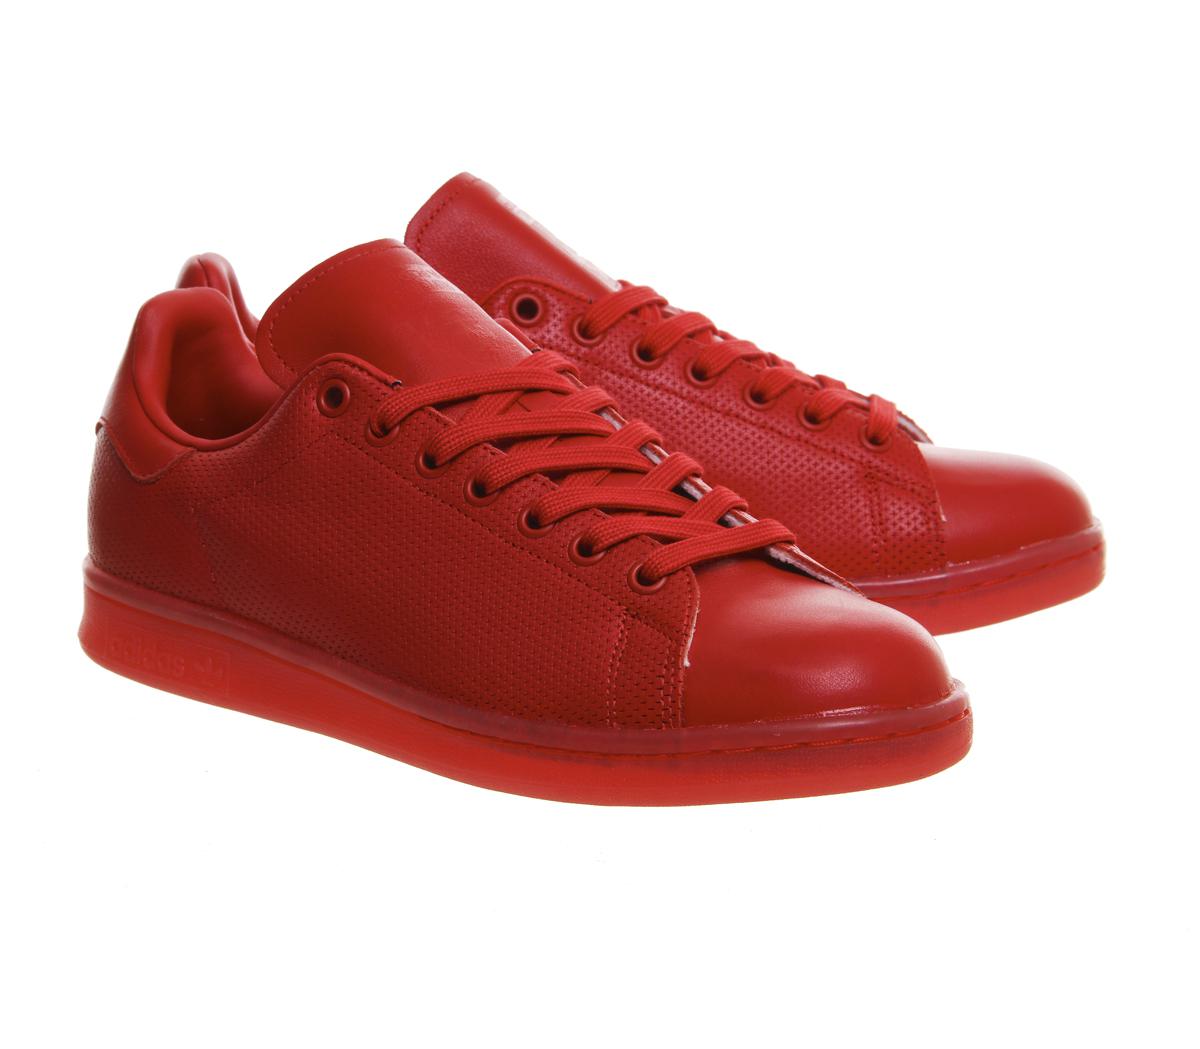 Lyst - Adidas Stan Smith in Red